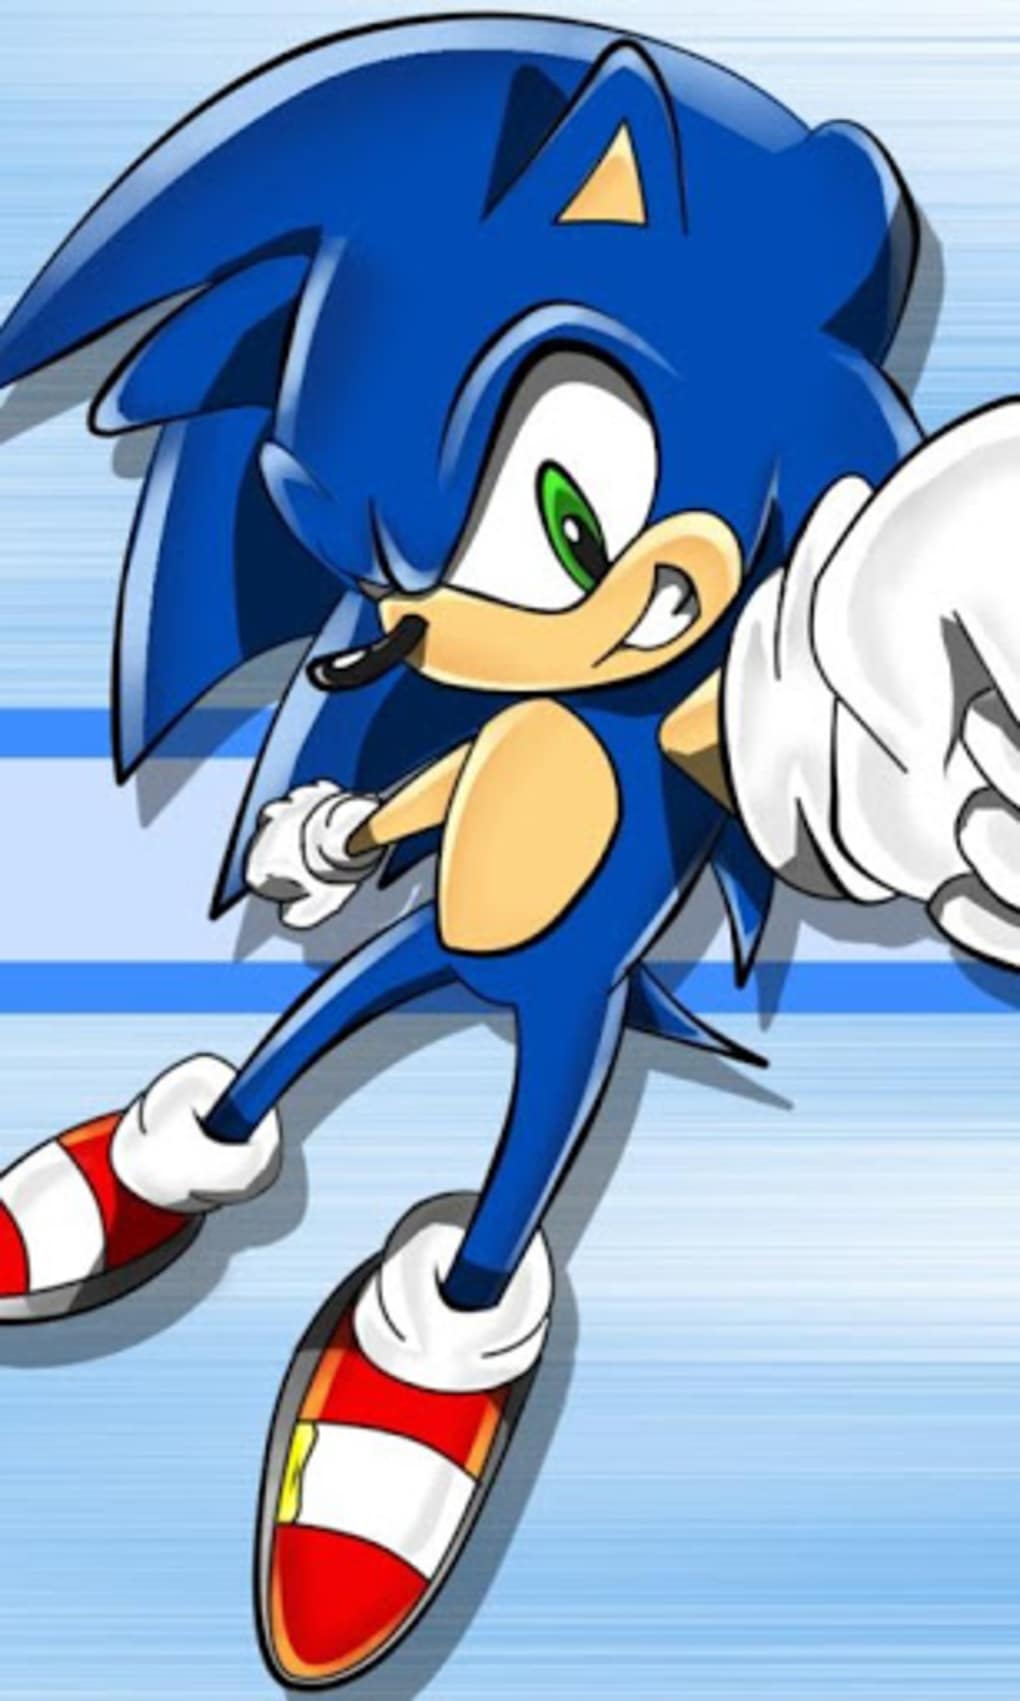 Sonic Wallpaper Android Cartoon Sonic The Hedgehog Animated Cartoon Fictional Character Fiction 7776 Wallpaperuse